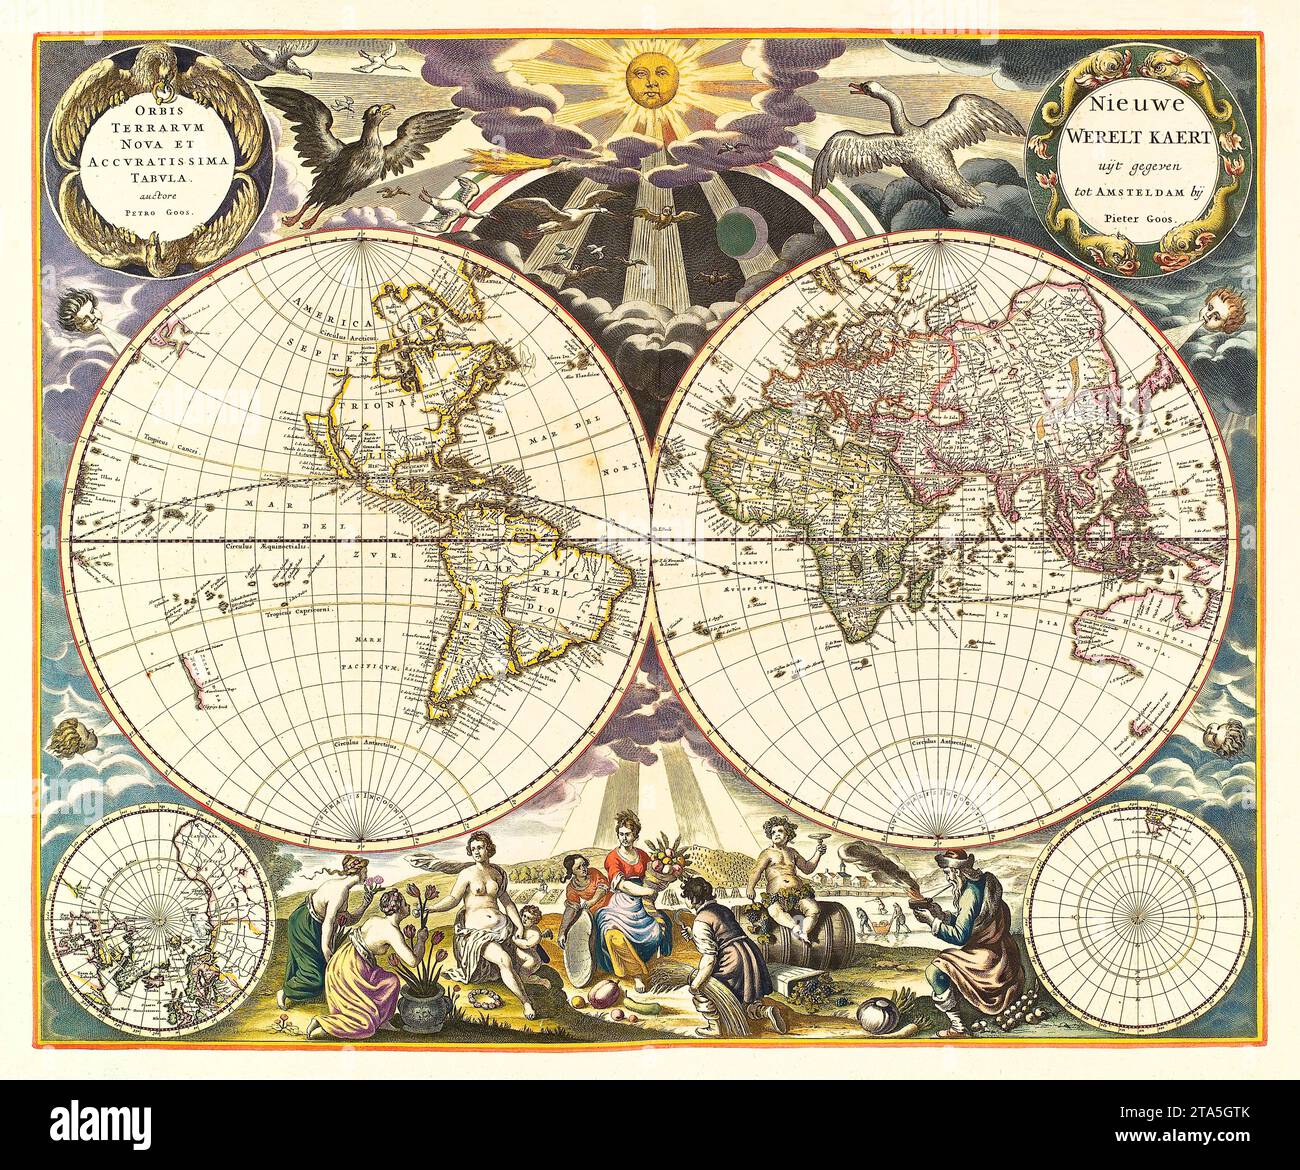 Old planisphere. By Goos, publ. in Amsterdam, 1668 Stock Photo